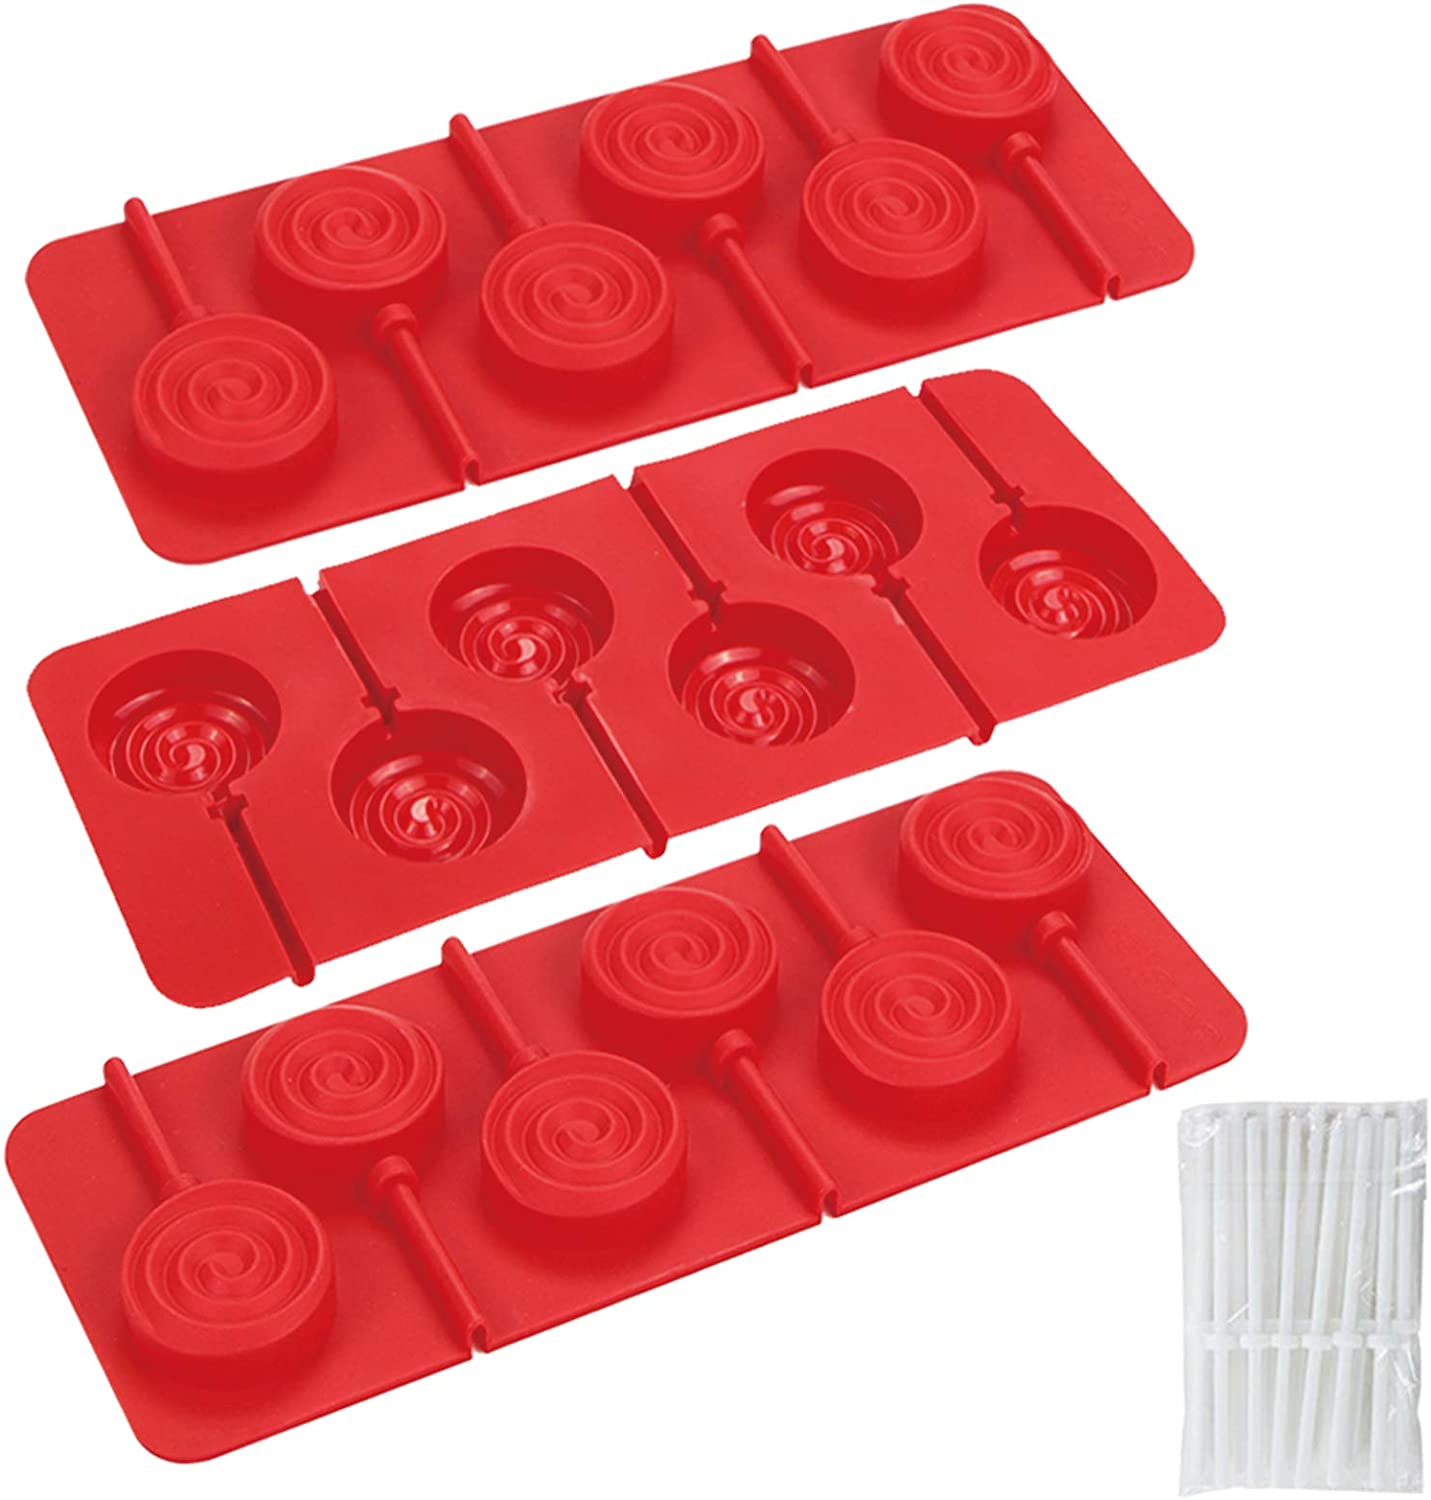 6-sided Shape Silicone Chocolate Mold Candy Making Mould Baking Tools Wax  Melt Mold Whole Block